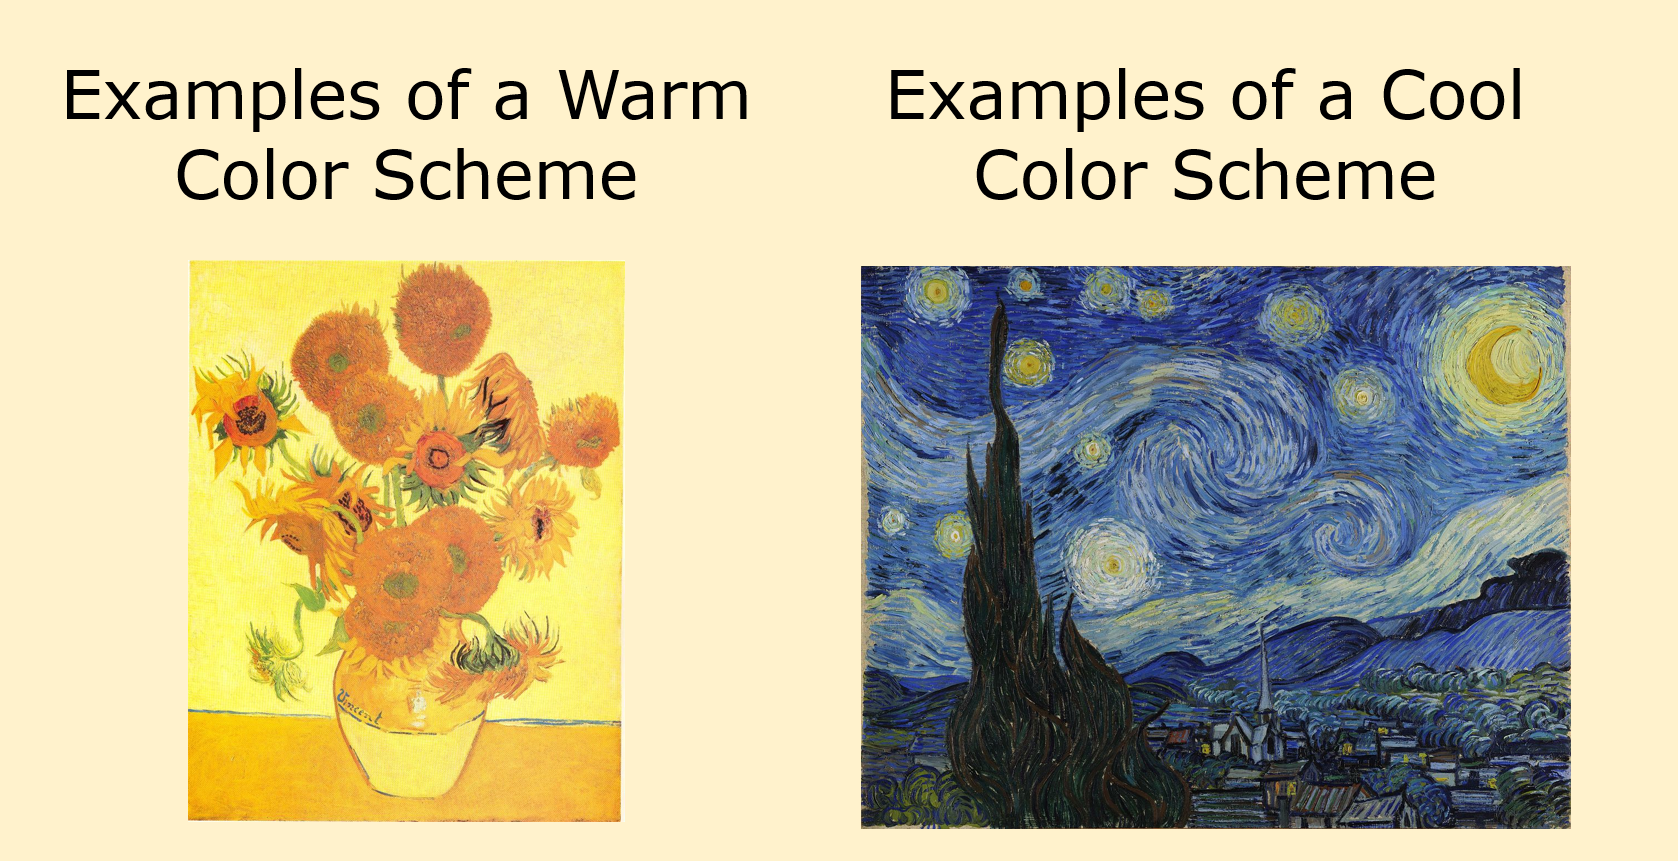 Examples of warm and cool color schemes